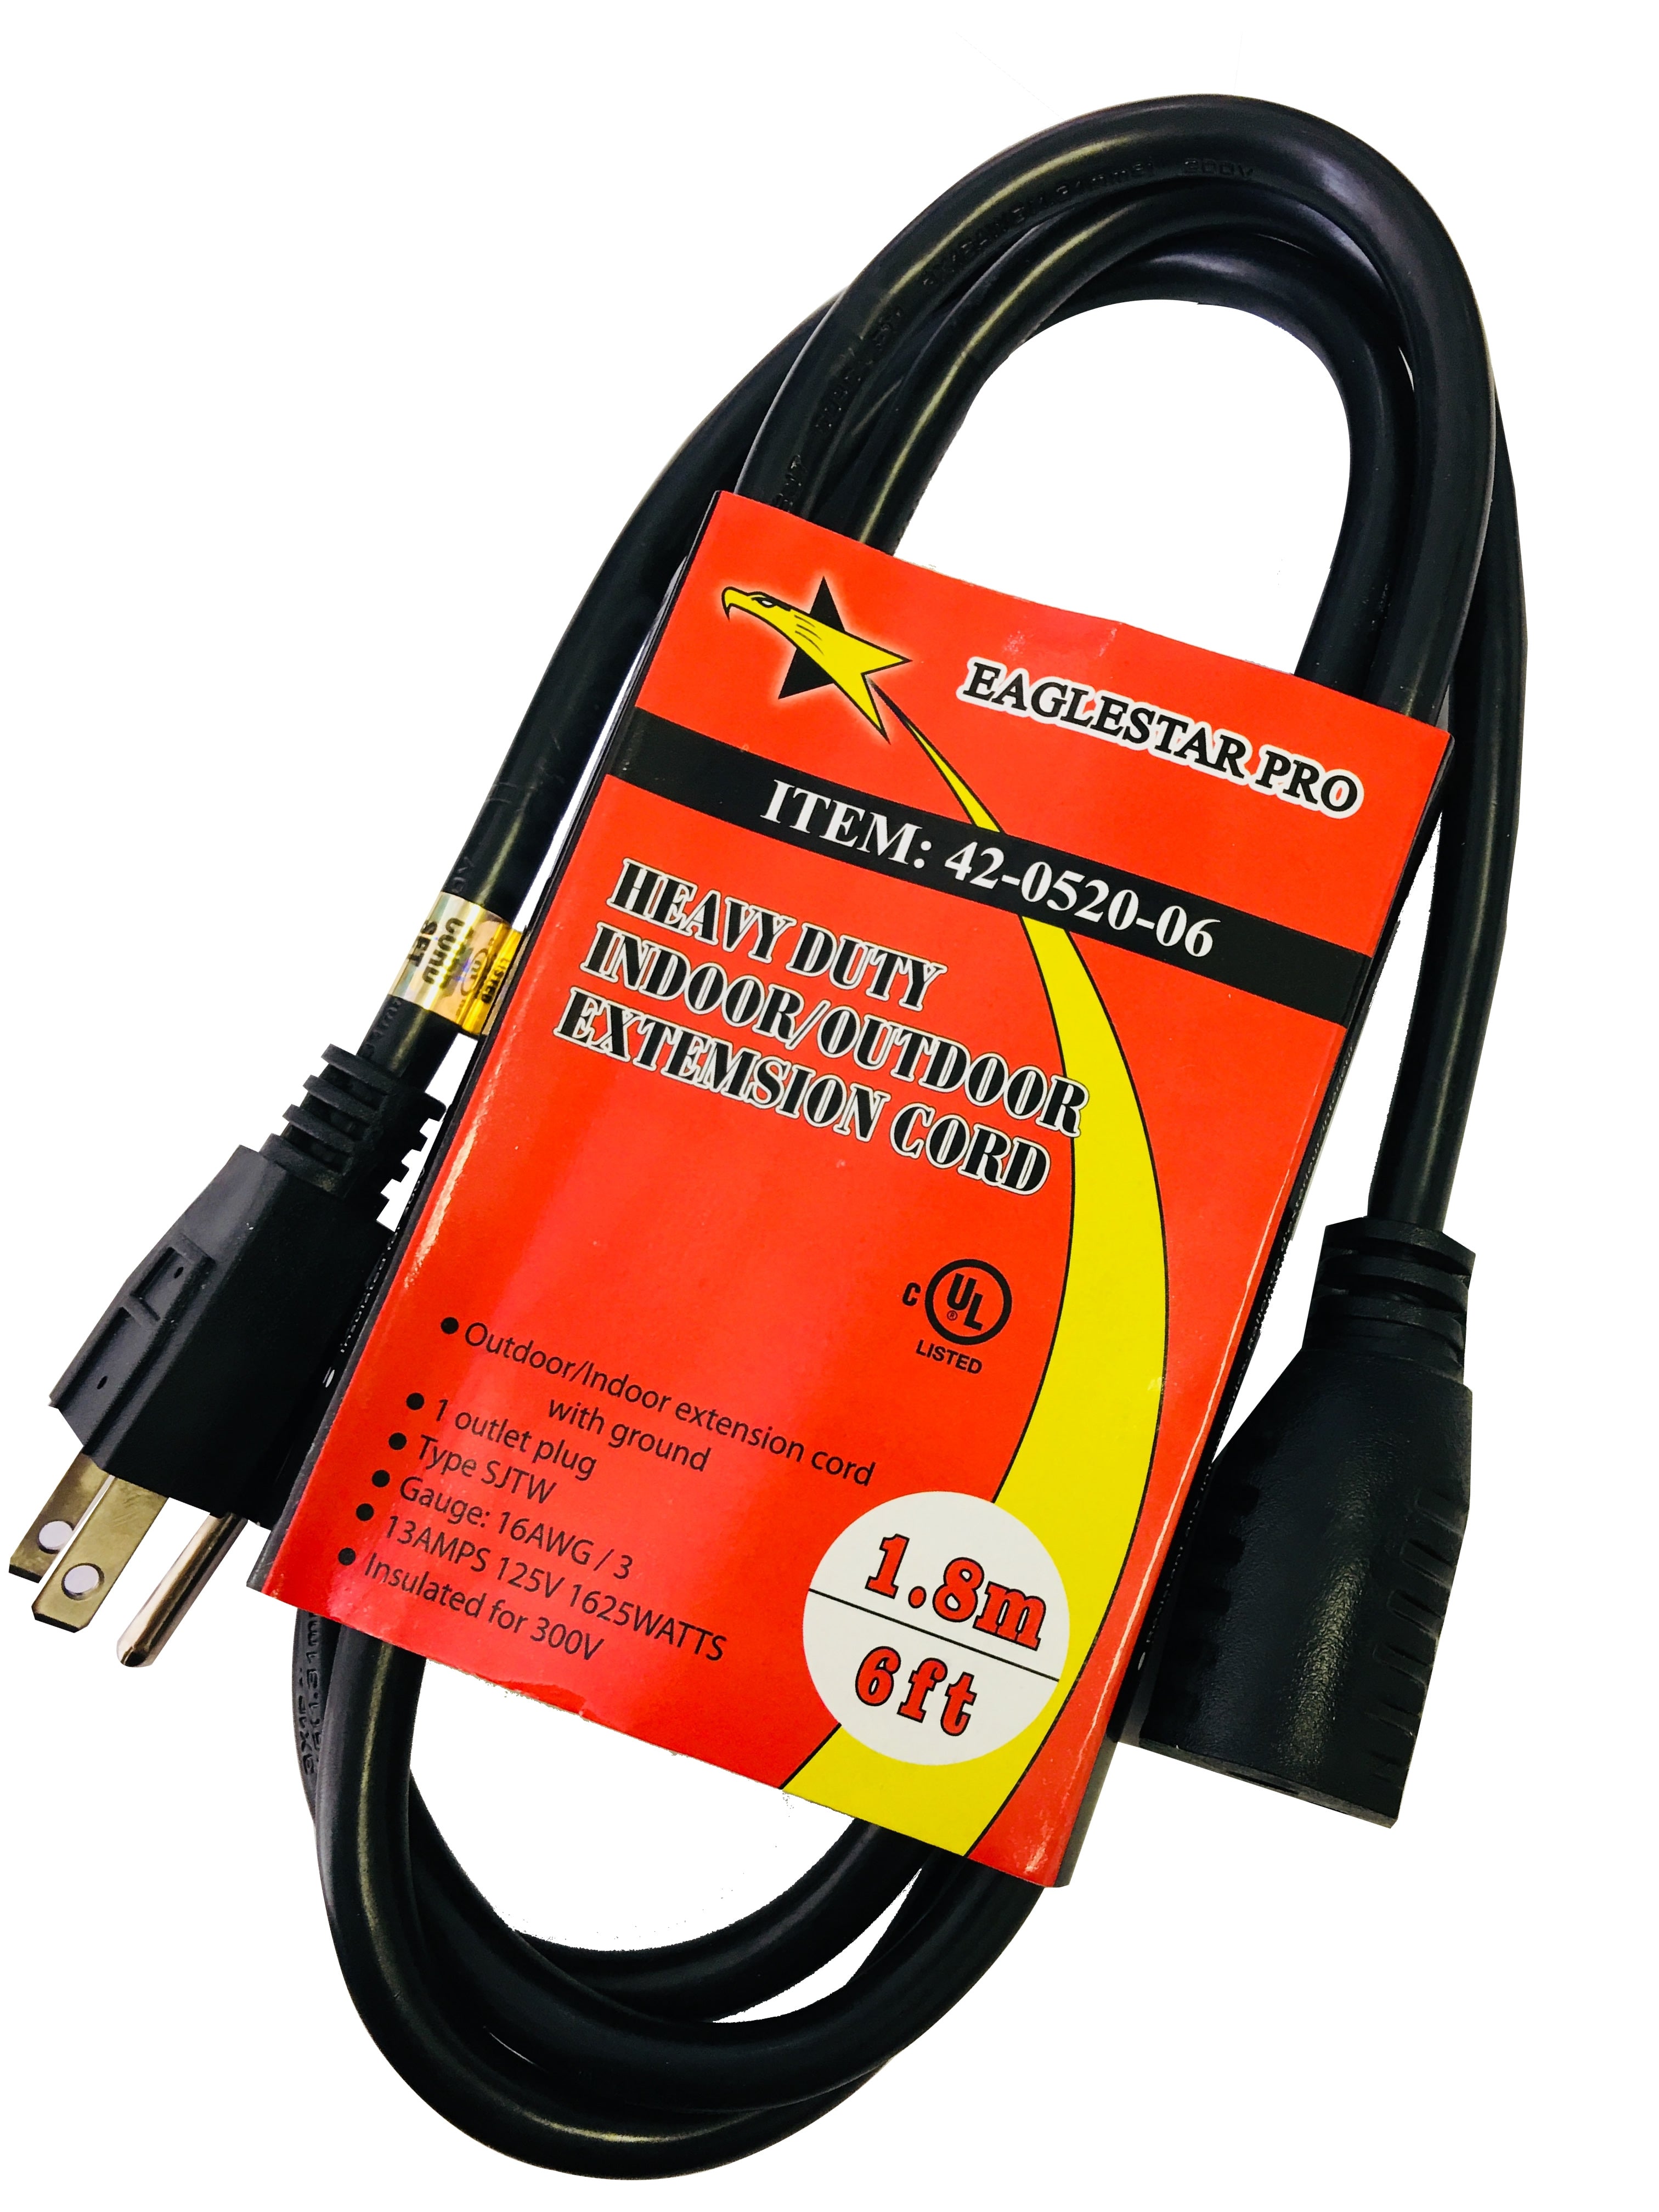 42-0520 Heavy Duty Grounded Indoor / Outdoor Extension Cord